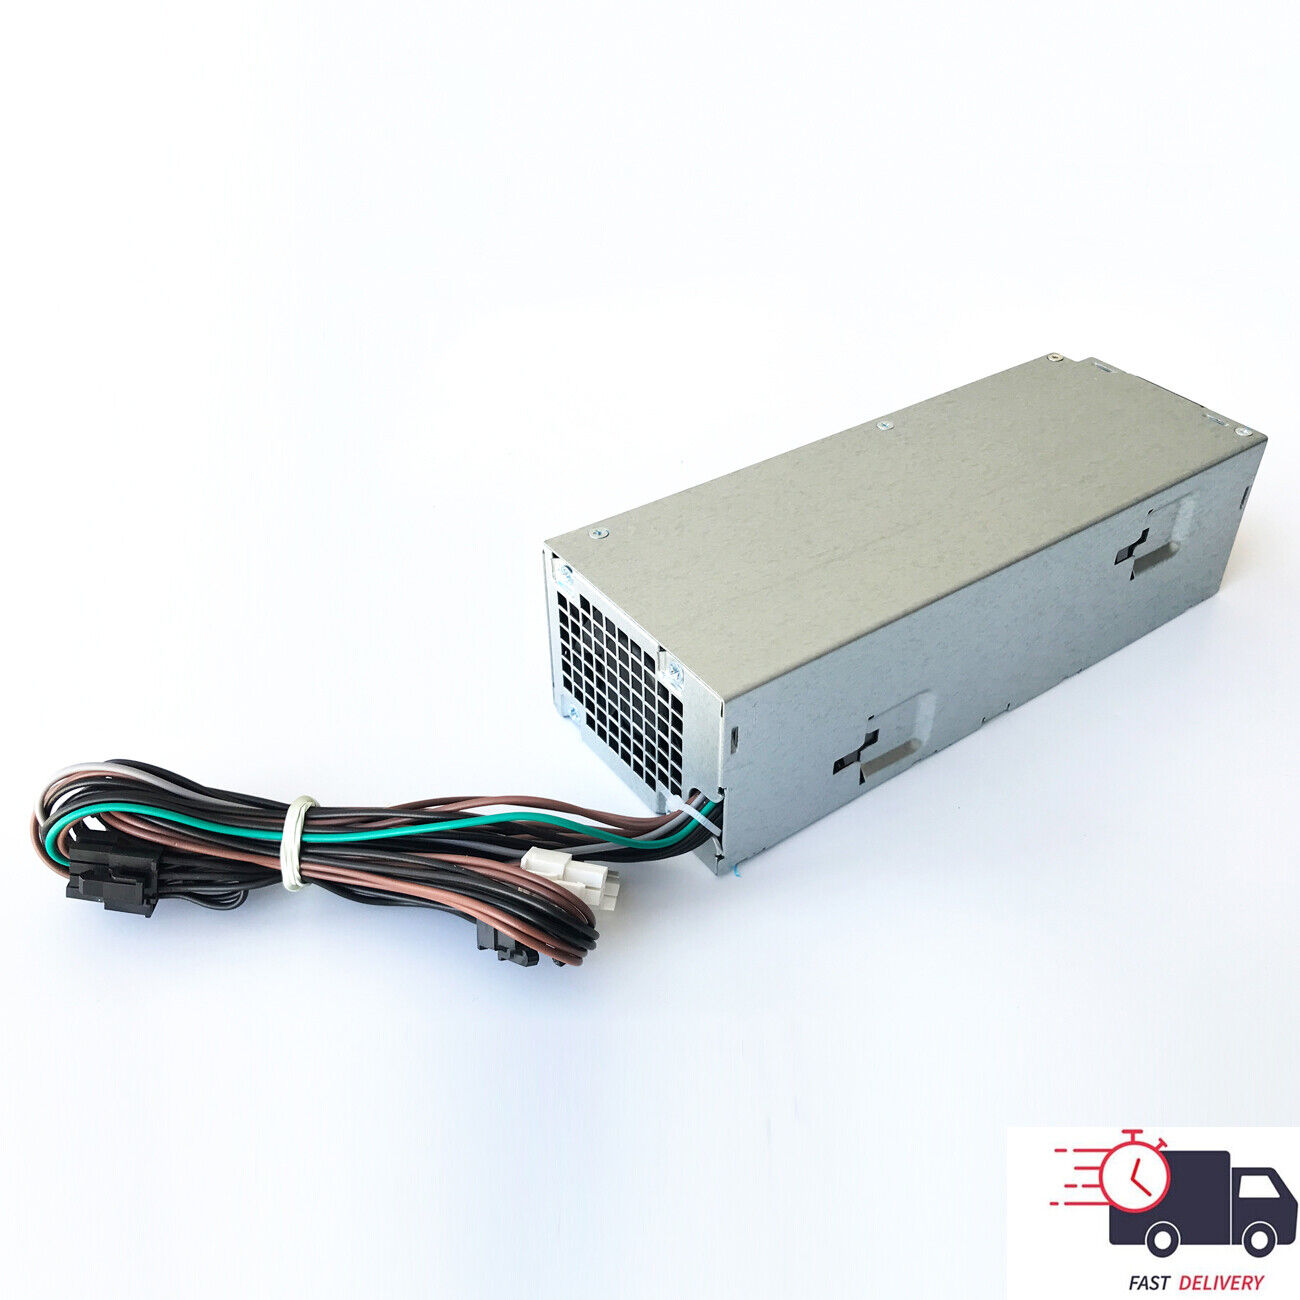 Power Supply PSU For Dell G5 XPS 8940 7060 7080 5060 G5-5090 500W D500EPM-00 US